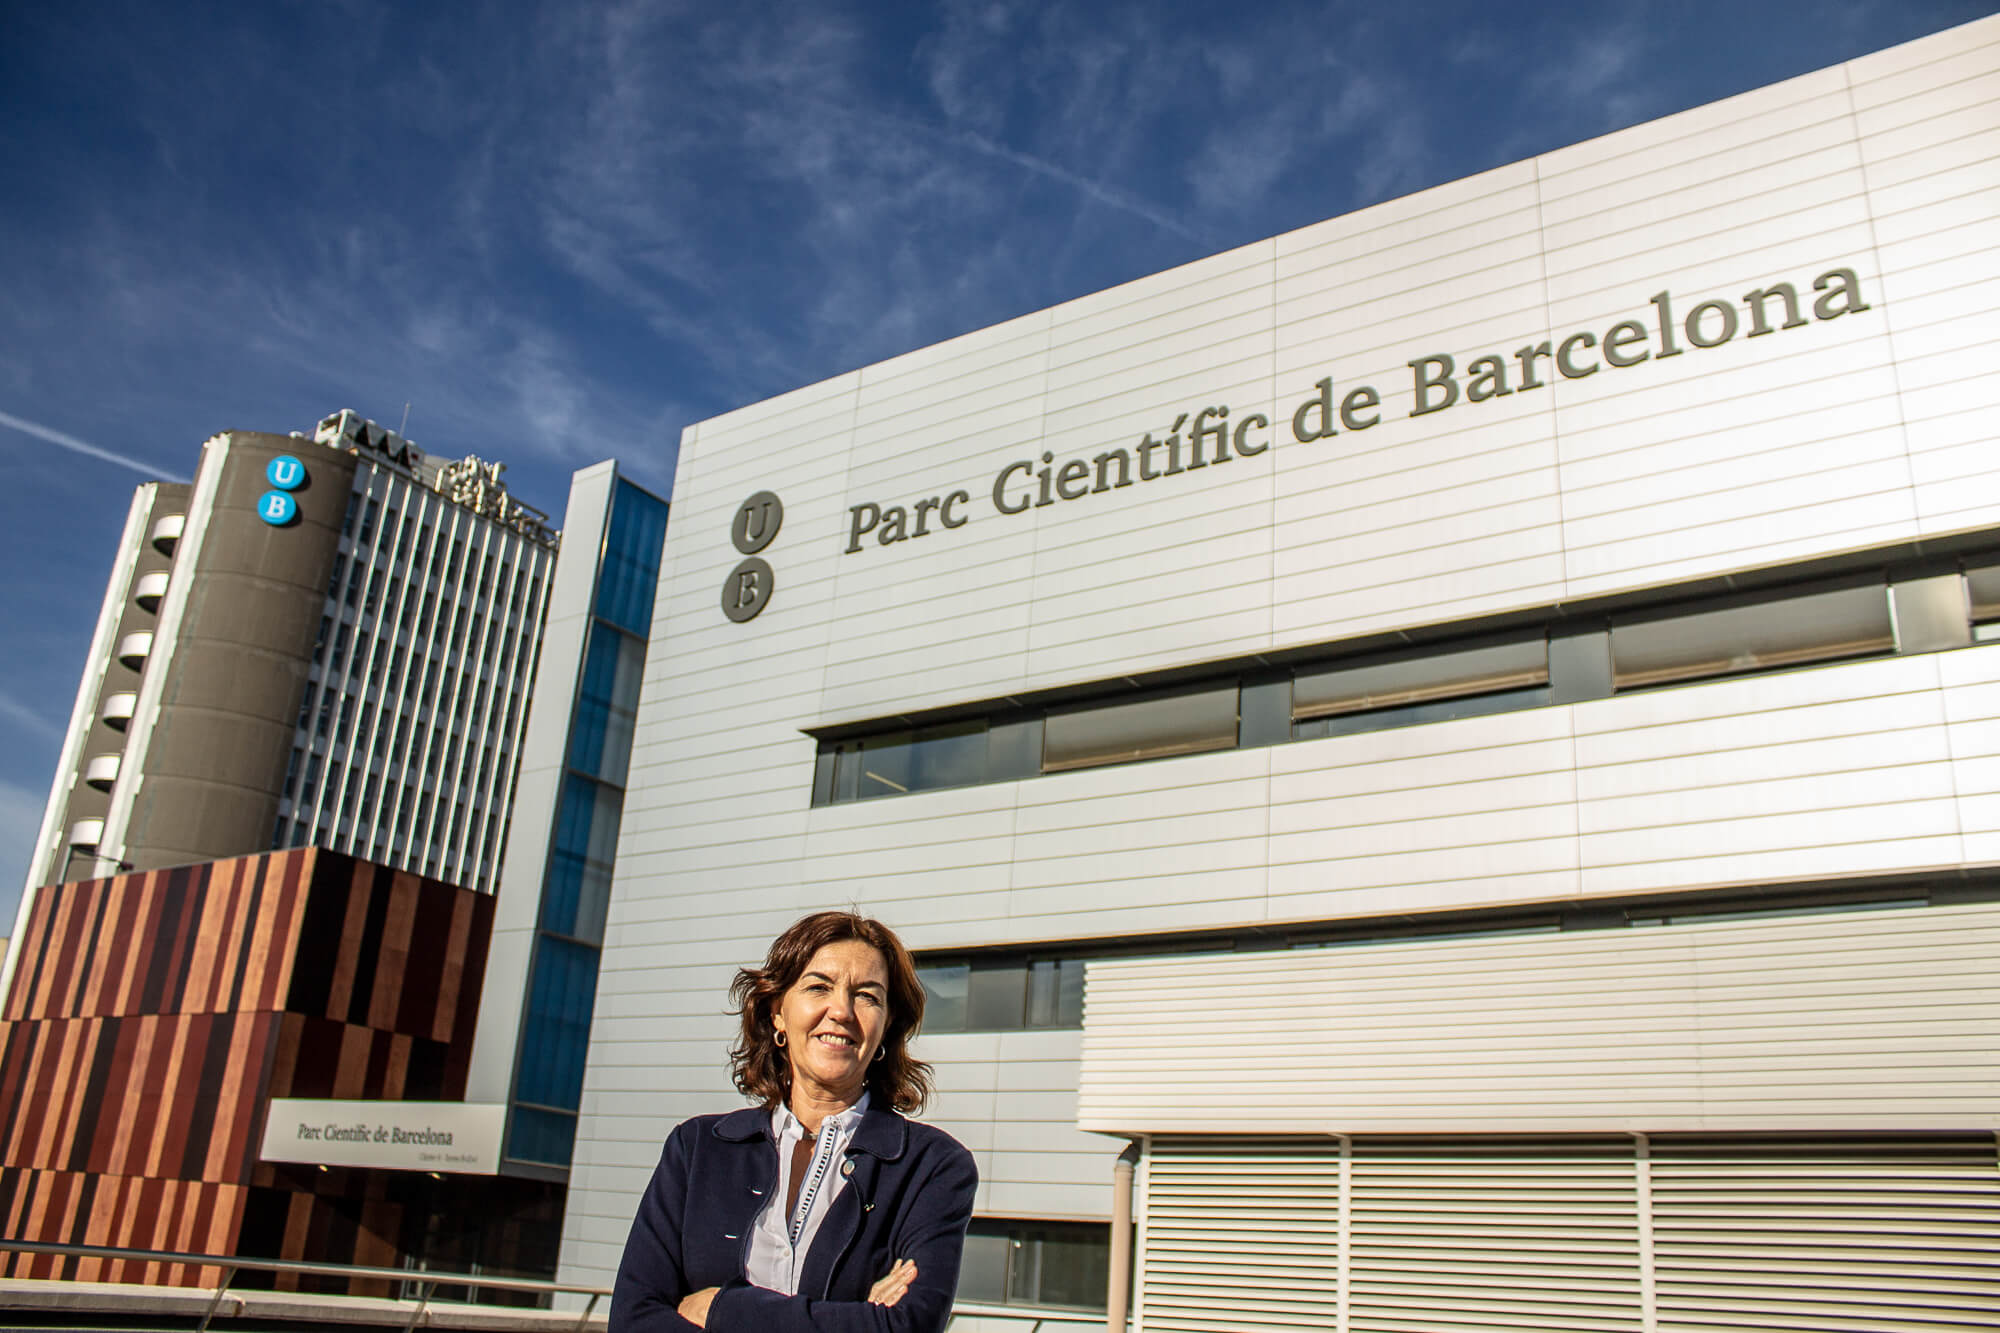 Statement by Maria Terrades, director of the Barcelona Science Park